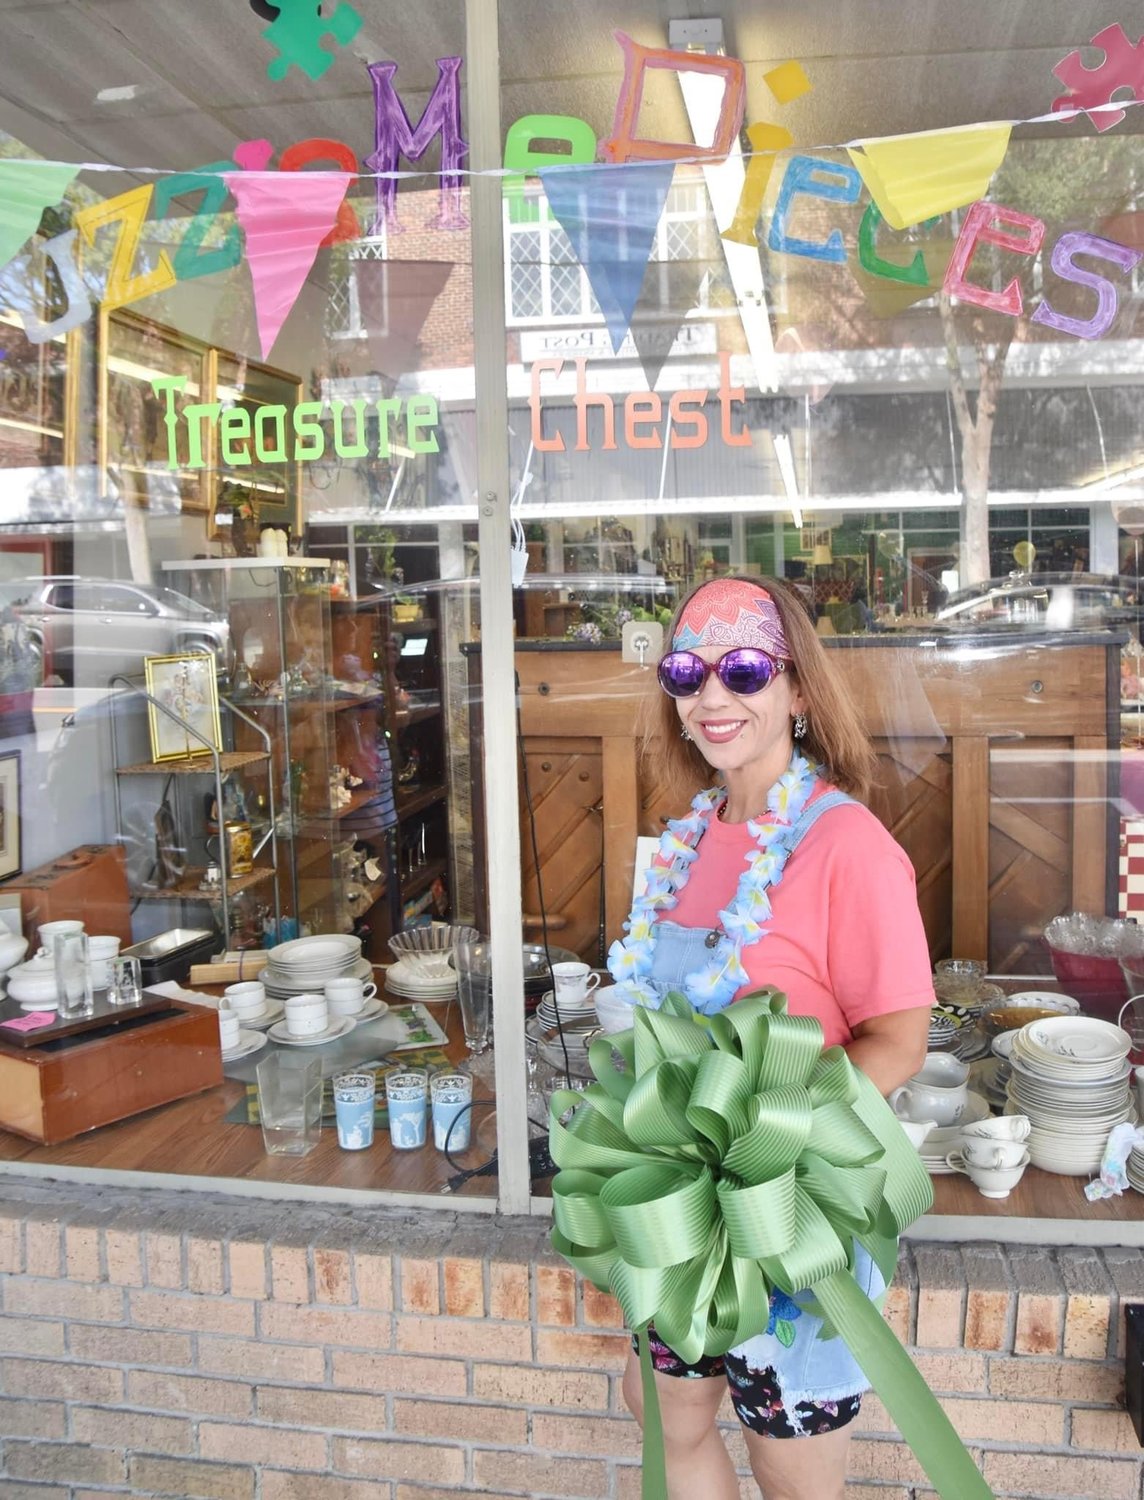 Angela Radcliffe, owner of The Clumsy Frog and Puzzle Me Pieces